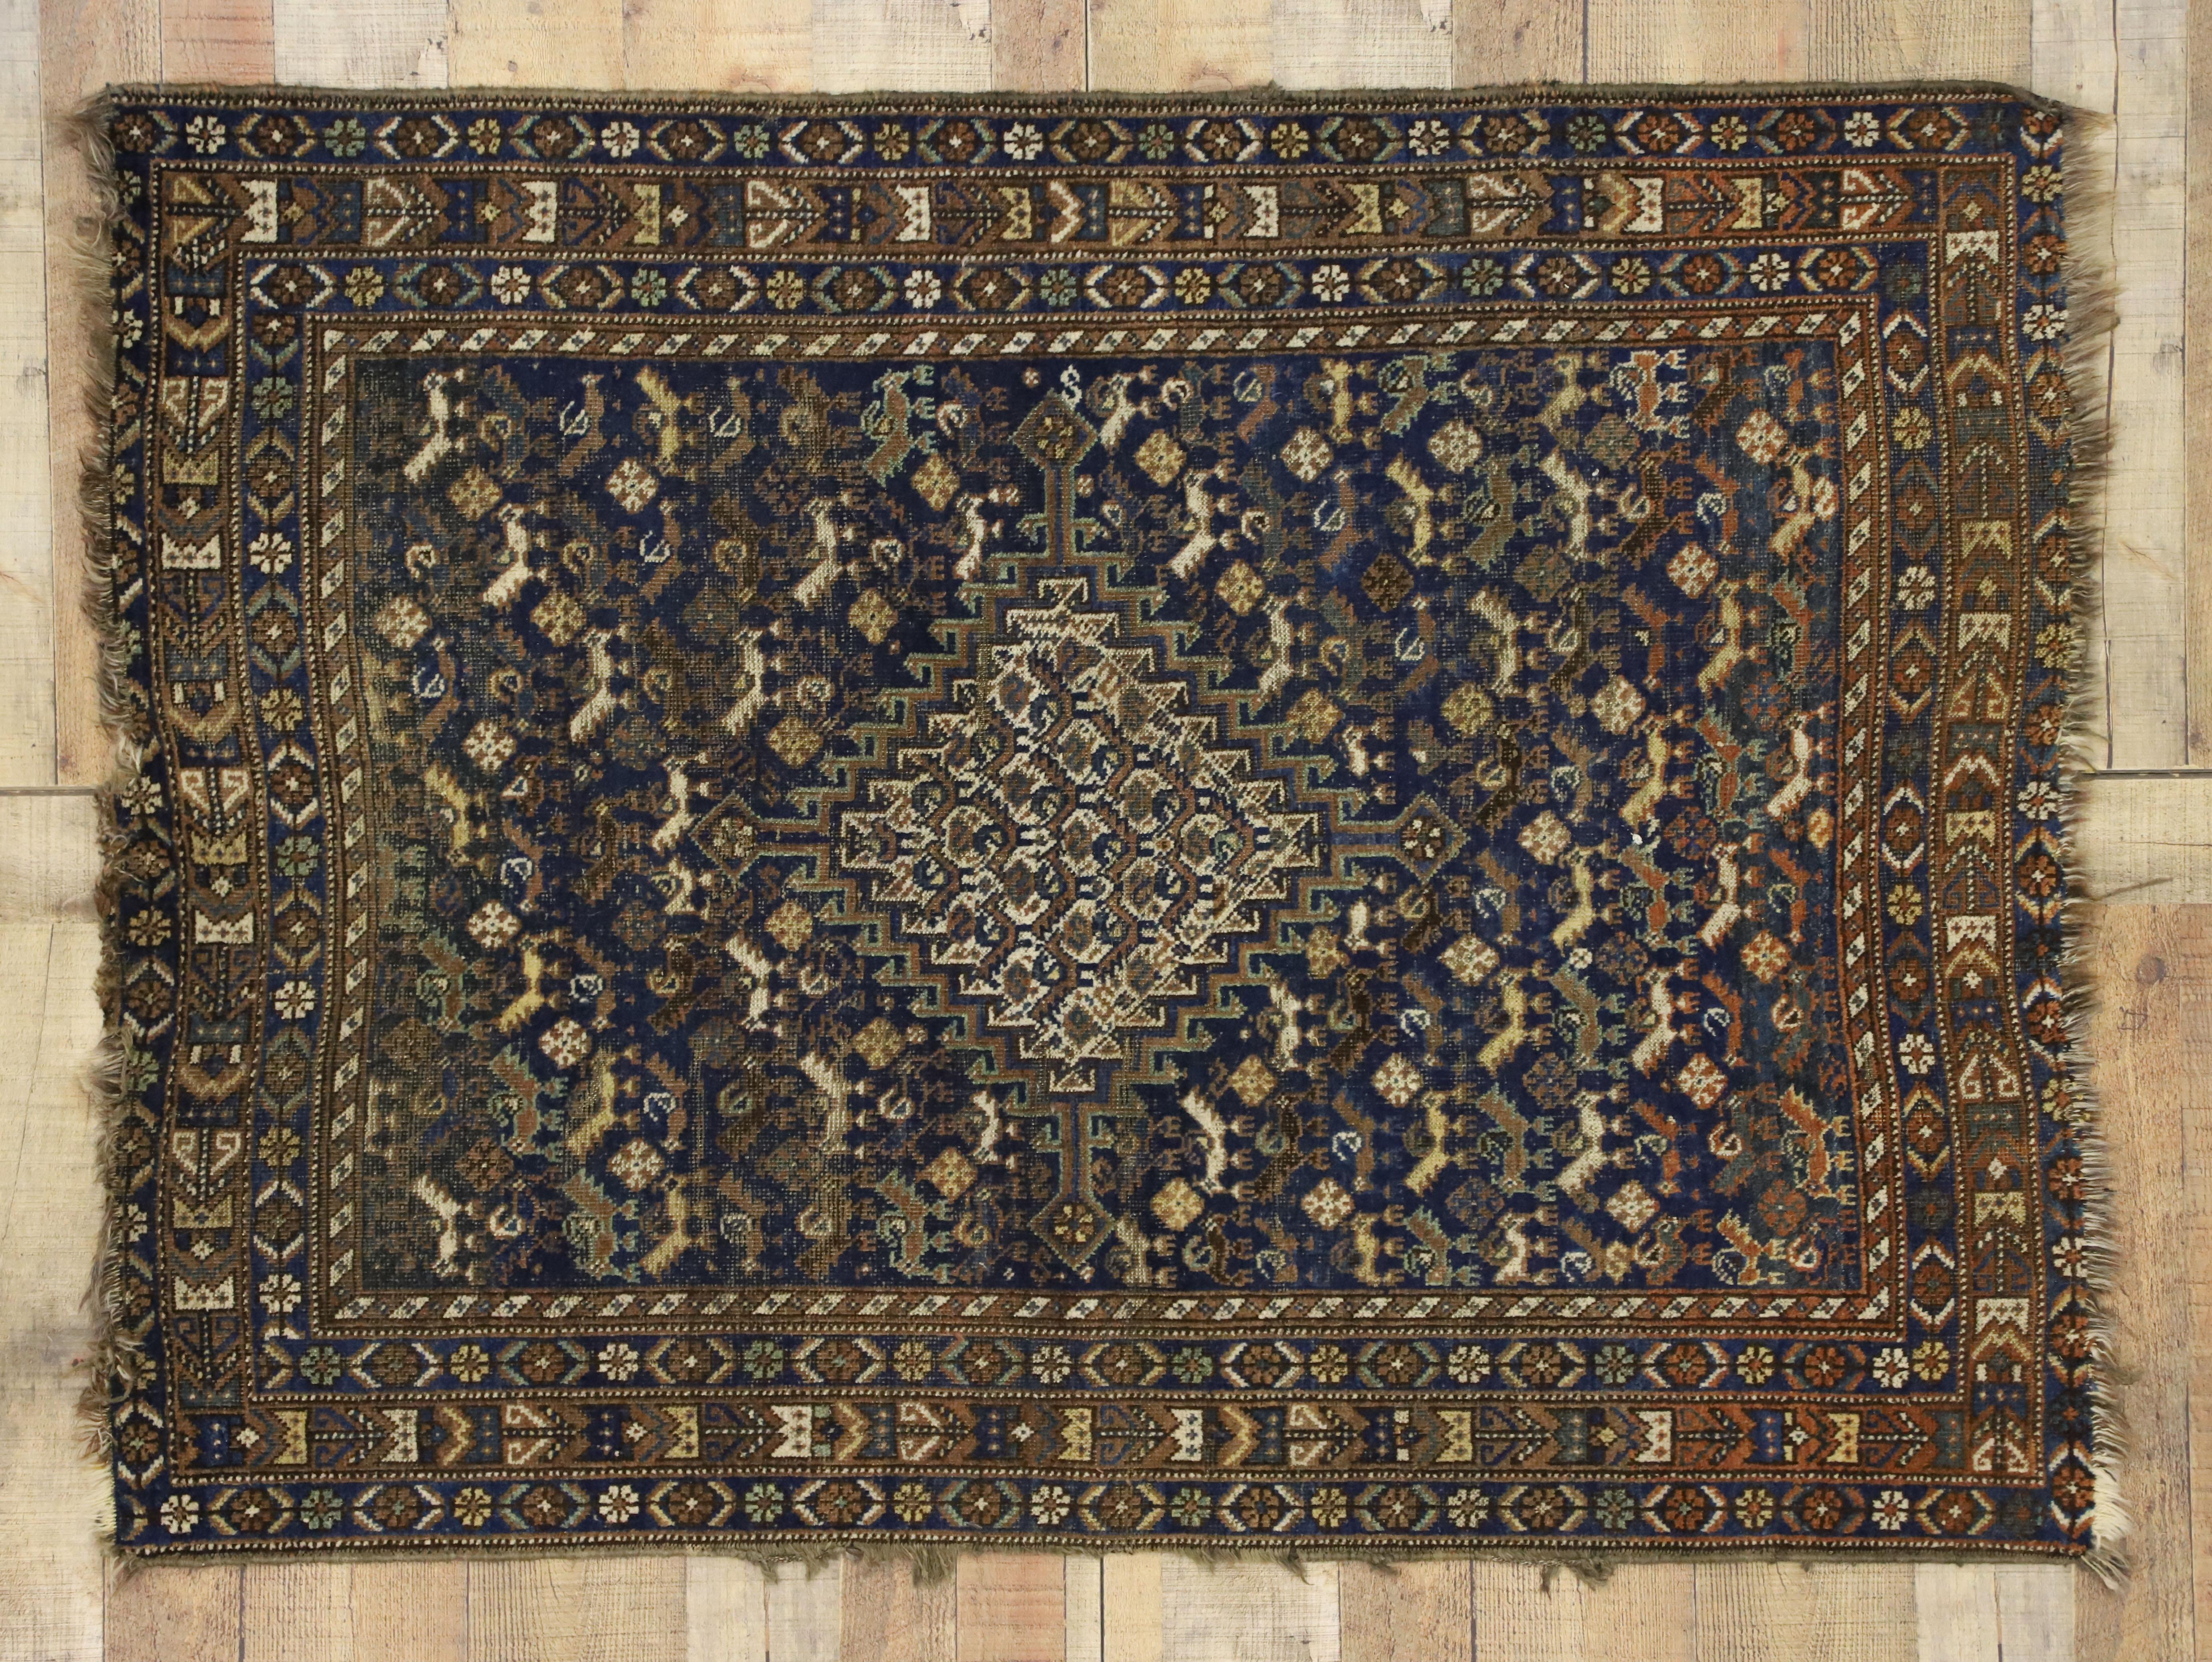 Worn-In Distressed Antique Persian Shiraz Accent Rug with Adirondack Lodge Style For Sale 2